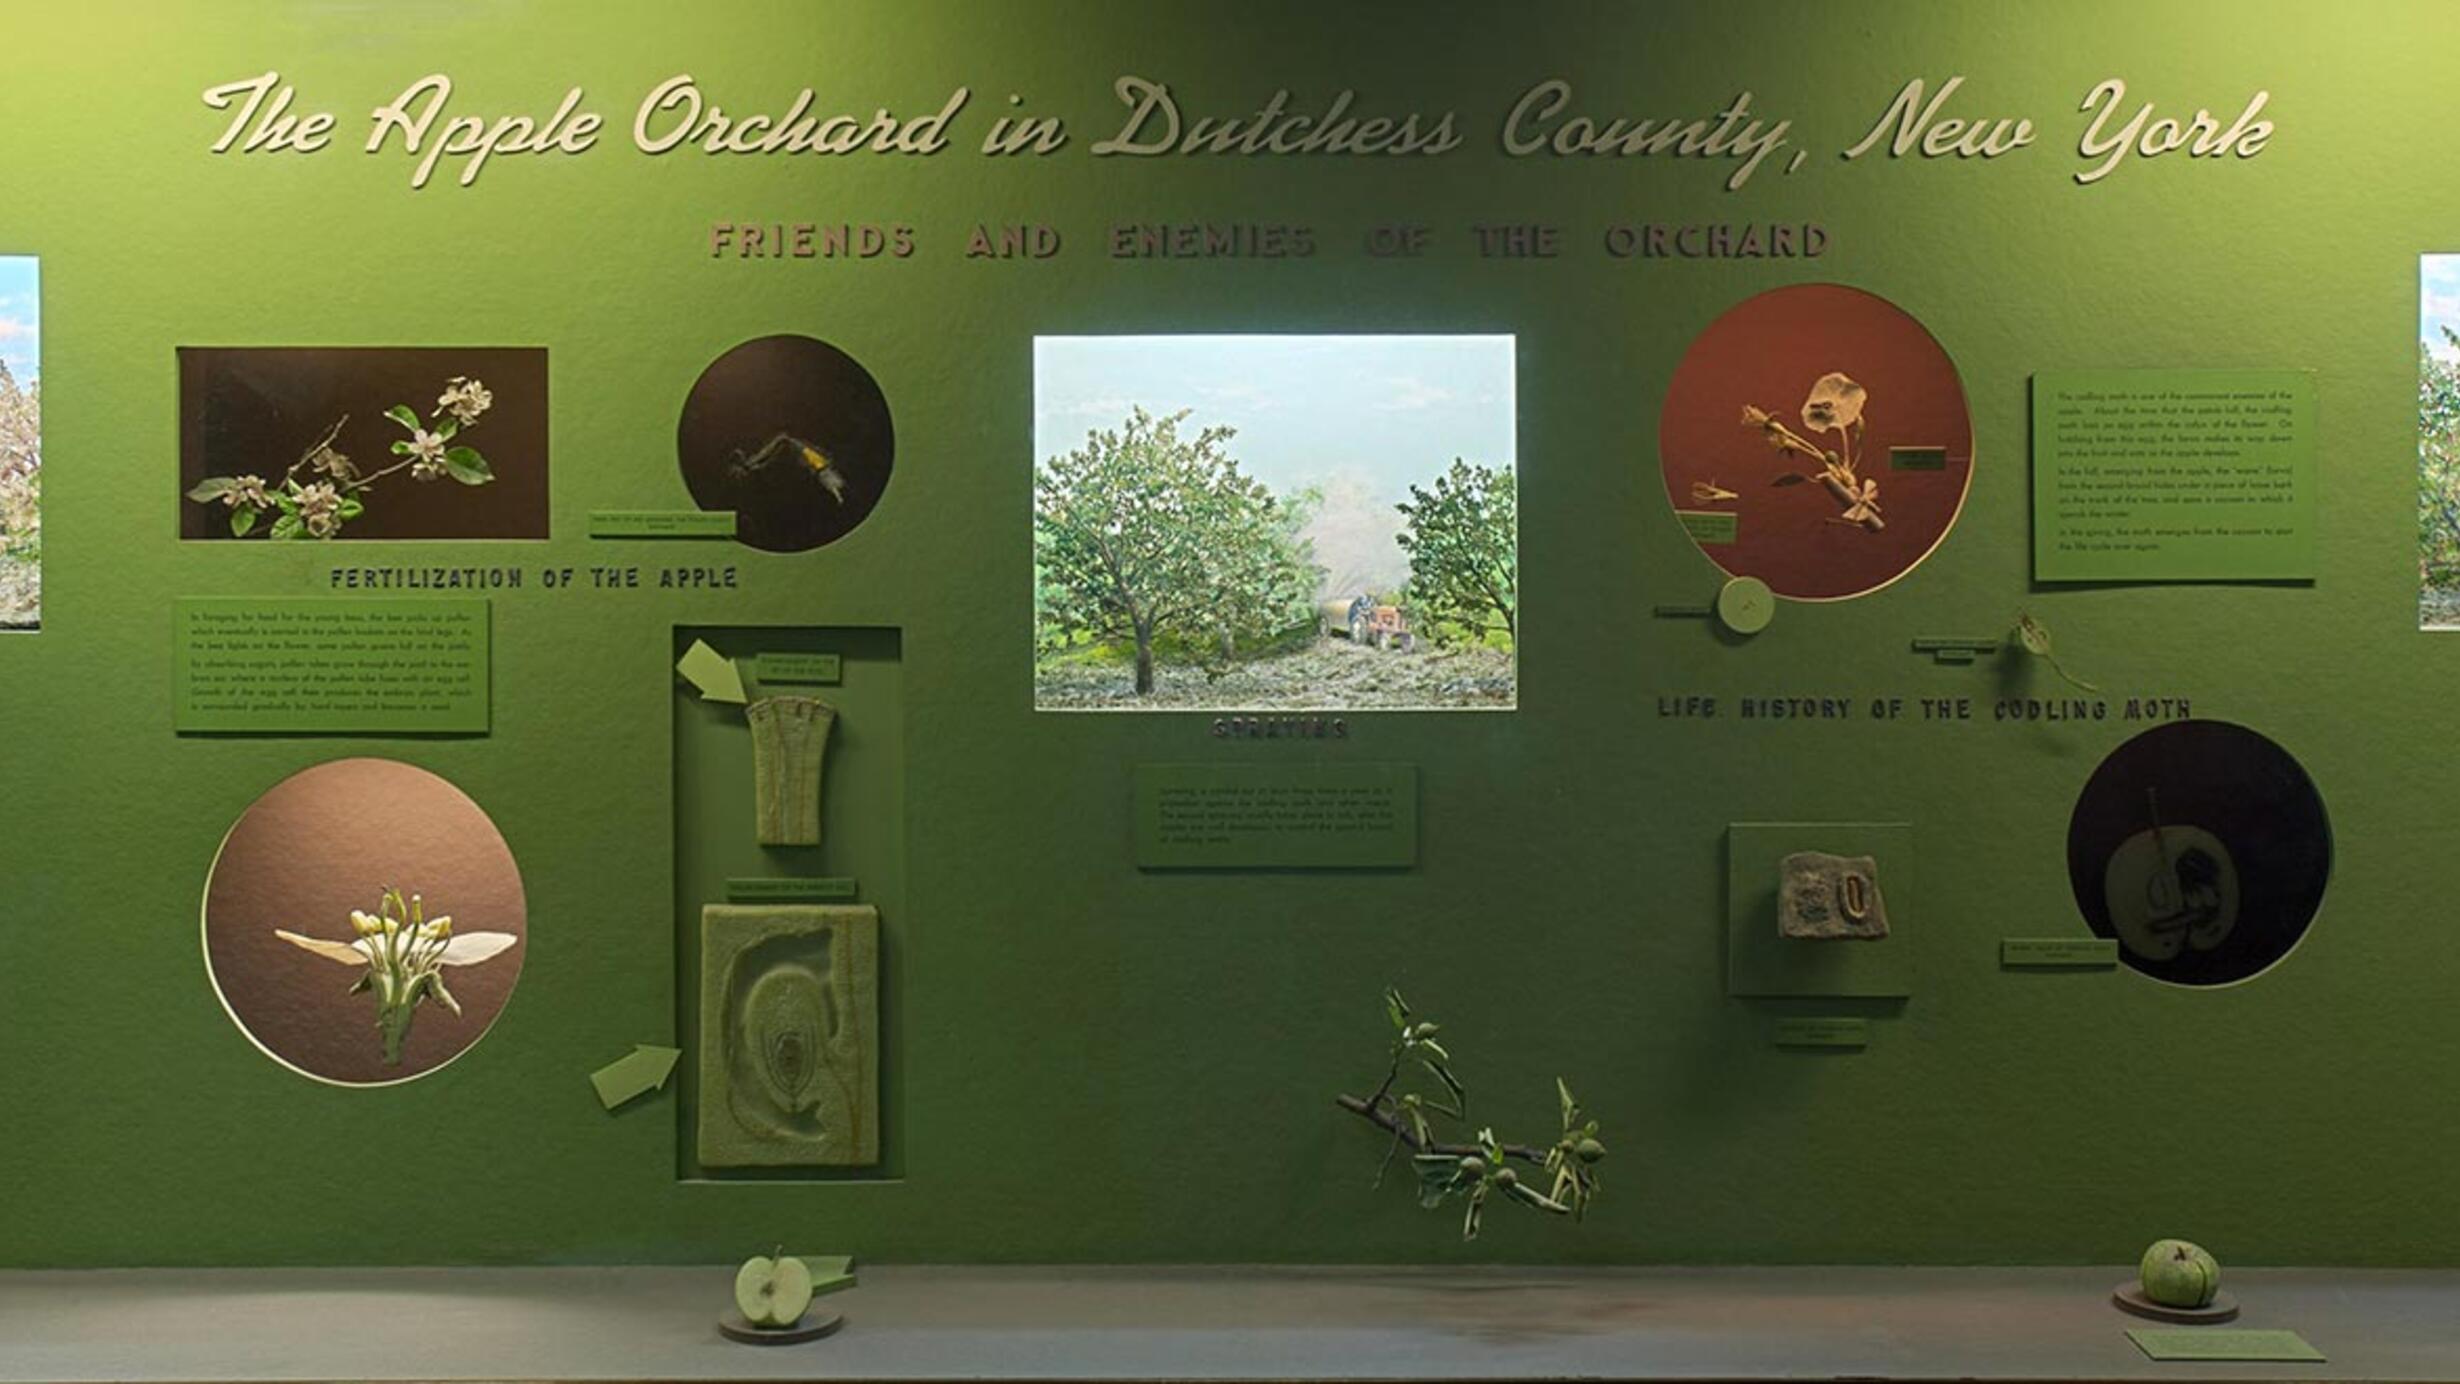 Museum case containing models and dioramas illustrating the varieties, reproduction, spra and pests of the apple orchard in Dutchess County, New York.